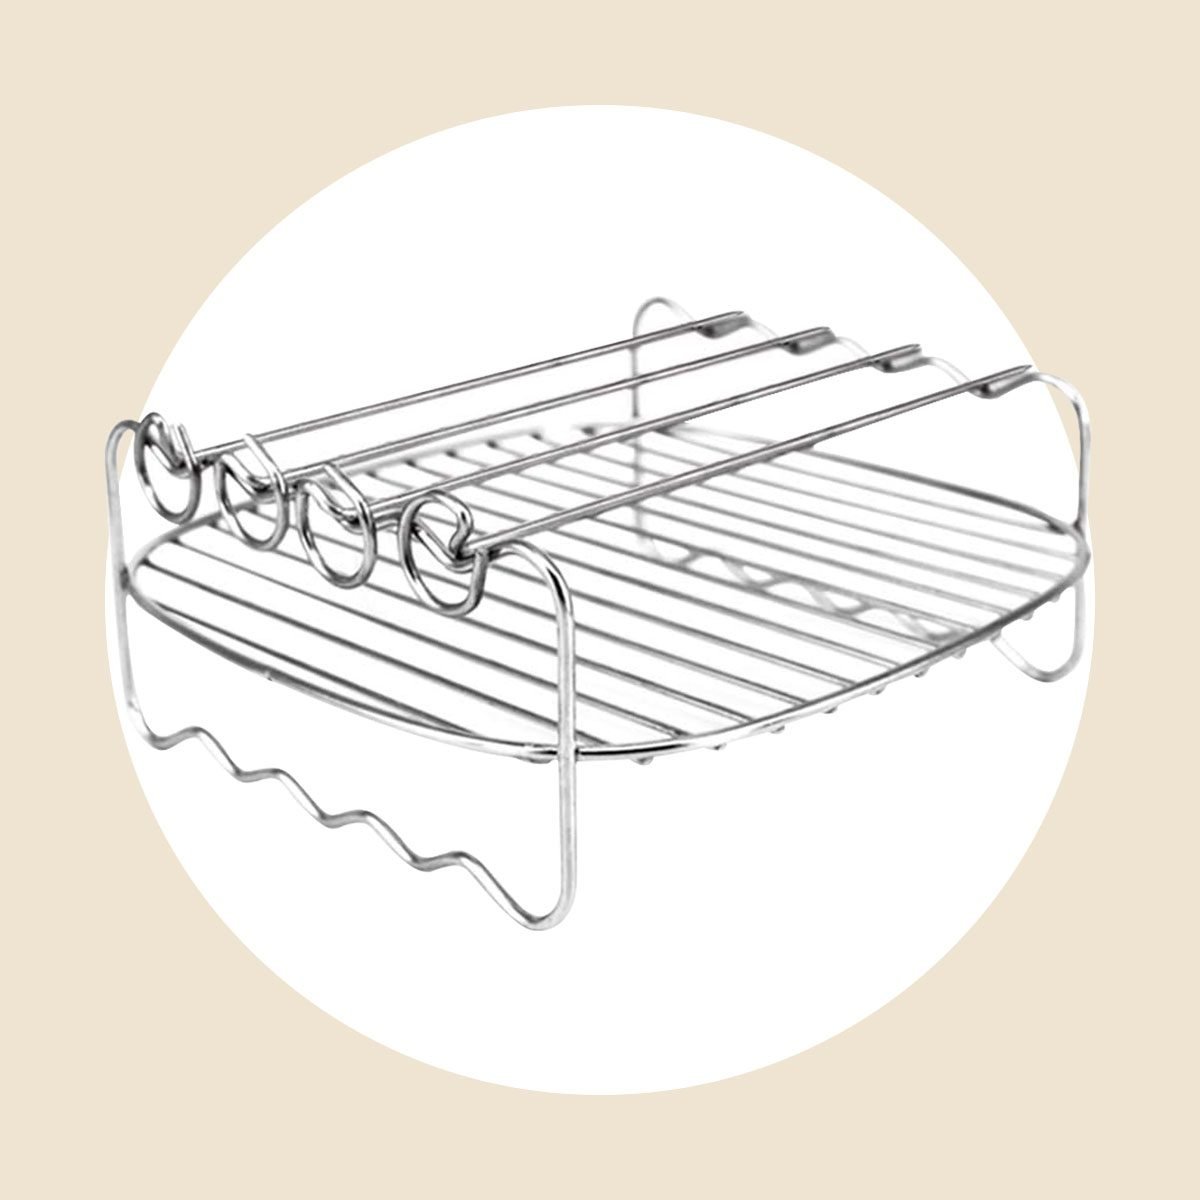 Air Fryer Rack for Double Basket Air Fryers Stainless Steel Multi-Layer Rack Grill Rack Multi-Purpose Double Layer Rack with 4 Skewers Dehydrator Rack